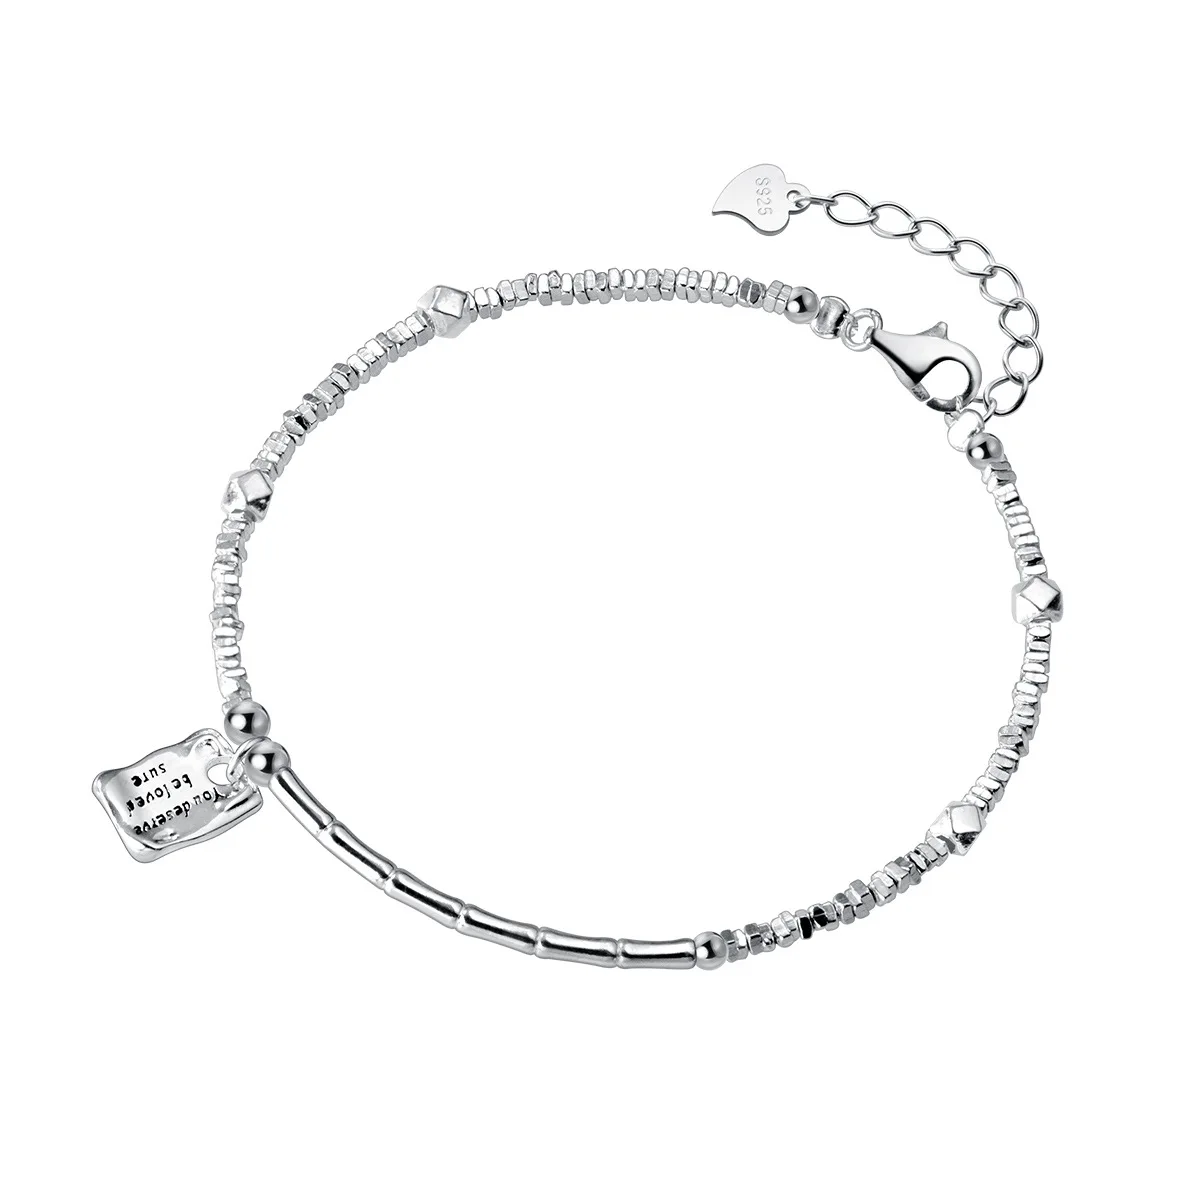 19+4cm Irregular Anklet and Bracelet For Women Silver 925 ID Card Shinny Fine Jewelry